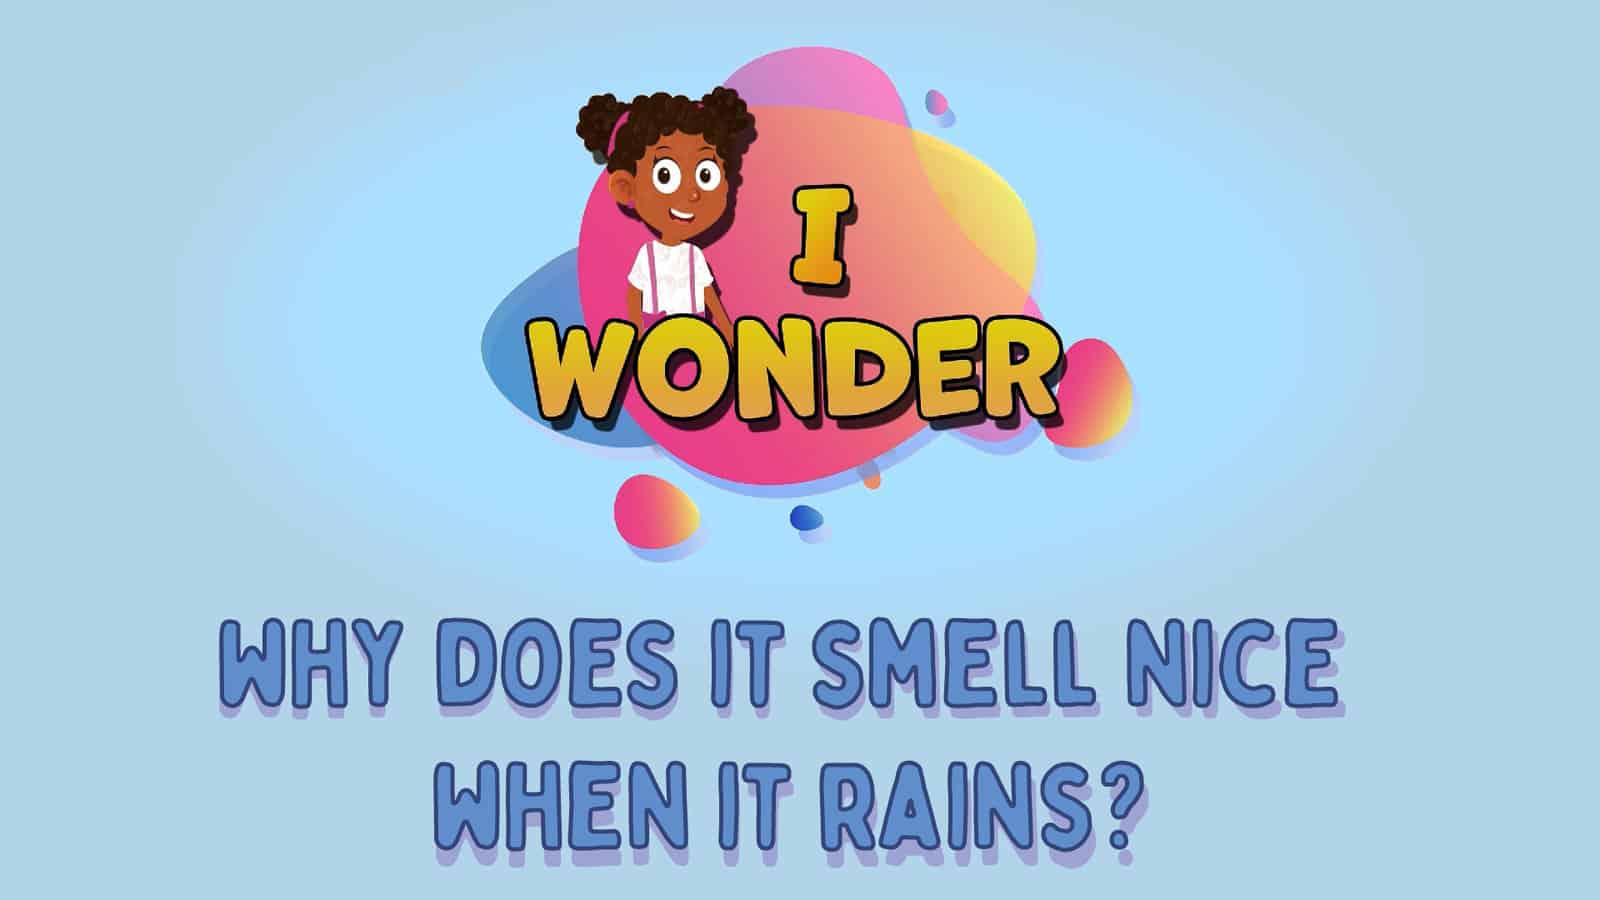 Why Does It Smell Nice When It Rains?